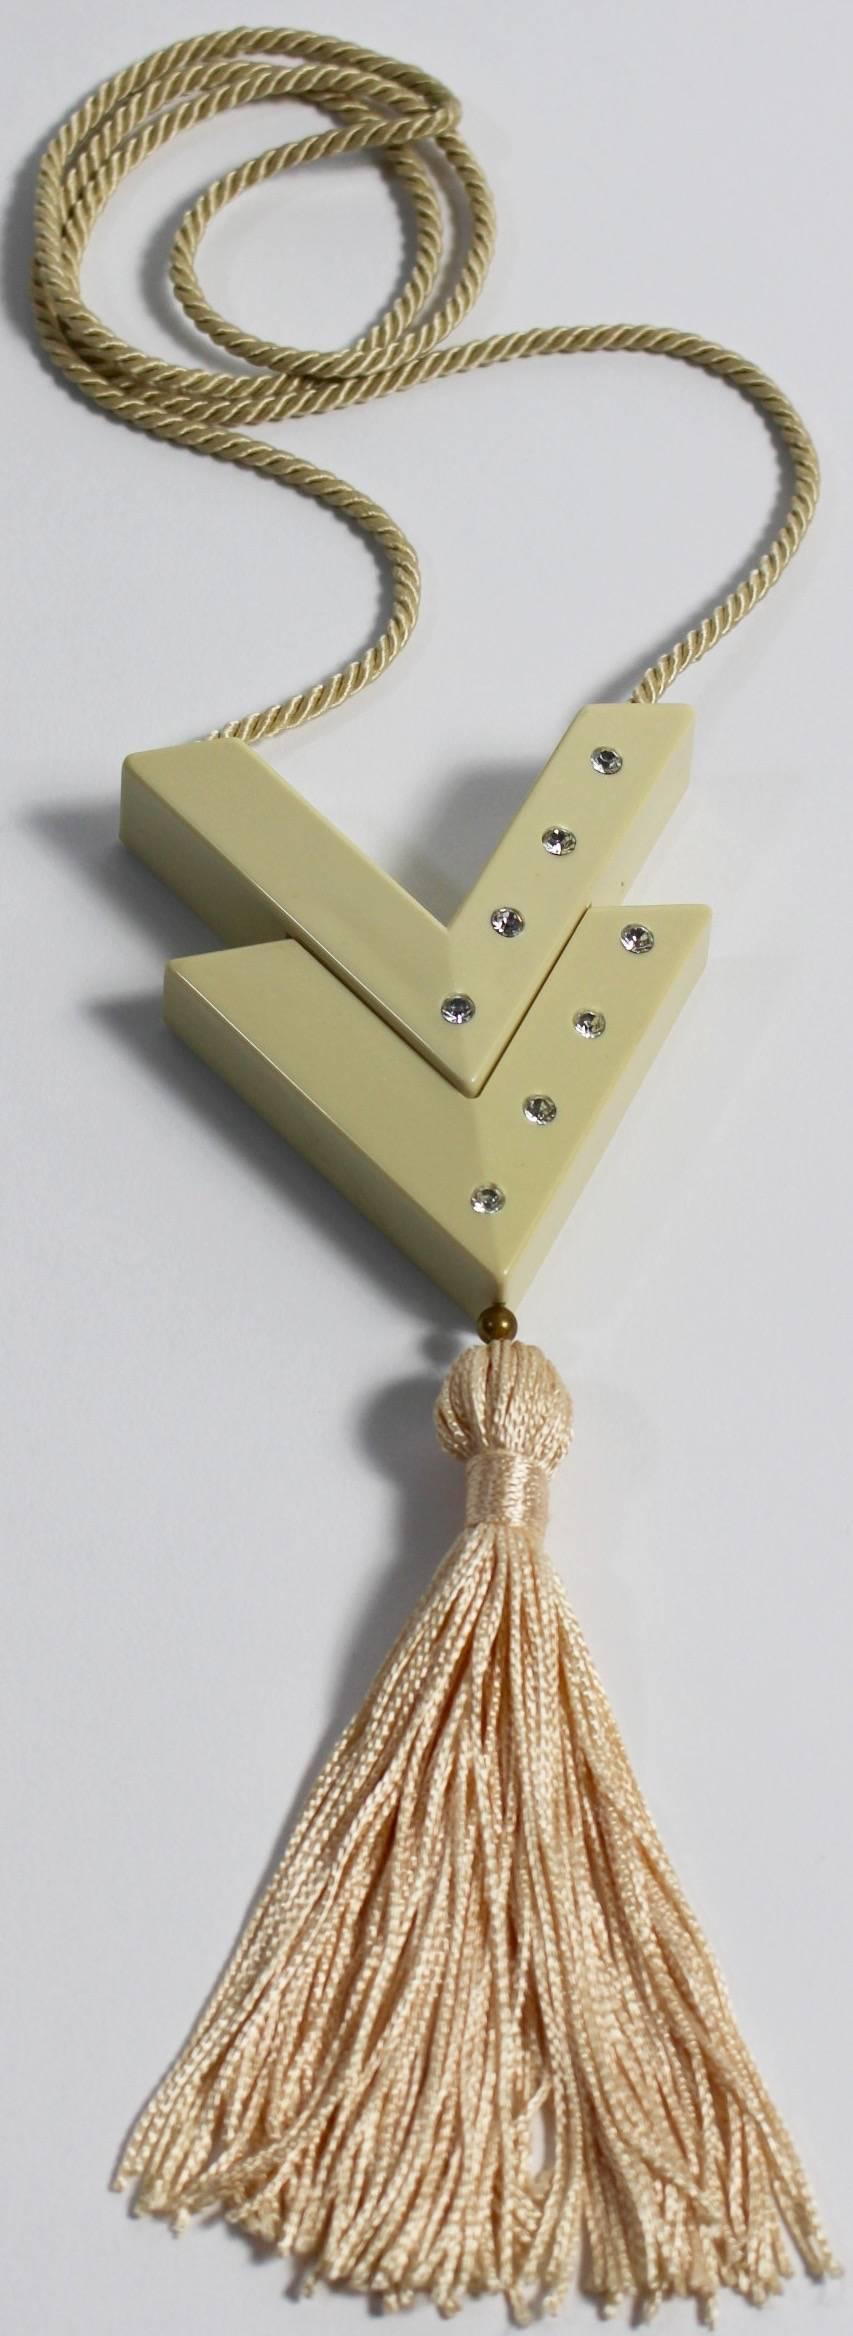 Fabulous vintage Valentino perfume tassel necklace 
This rare and collectable necklace is made of a bakelite type plastic in a champagne beige color.
The cording on the necklace is sturdy and silky feeling.
The pendant is a the letter 